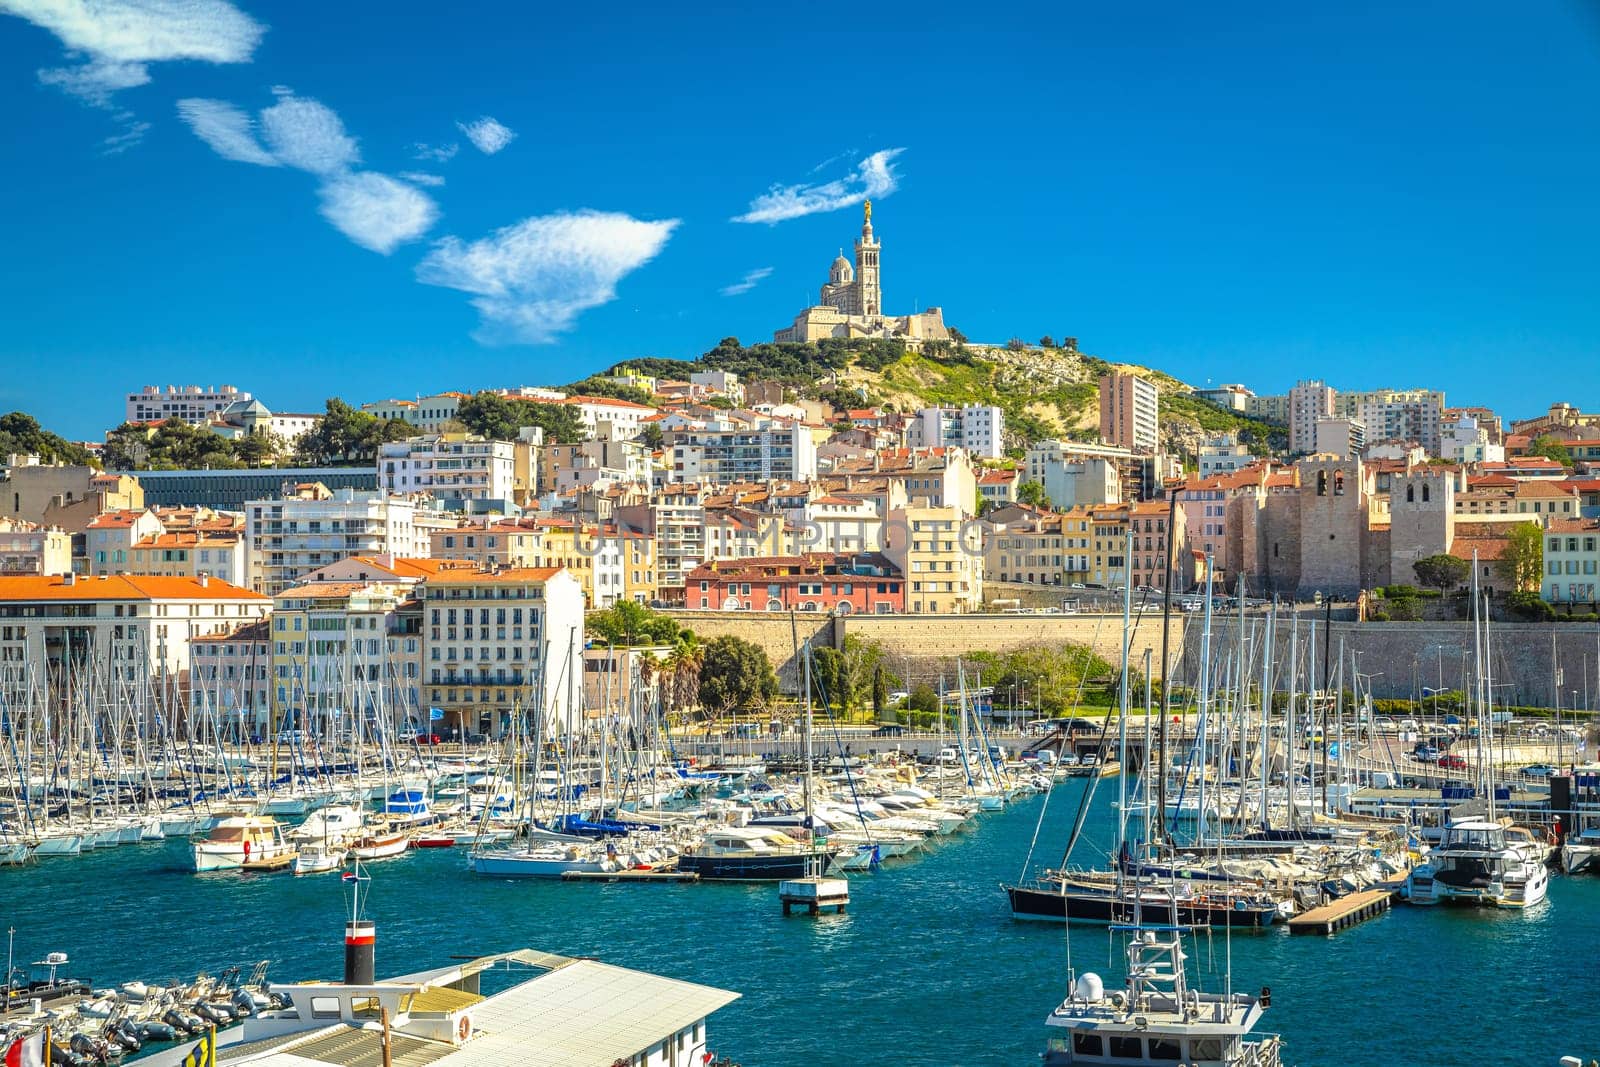 City of Marseille harbor and Notre Dame de la Garde church on the hill view, southern France